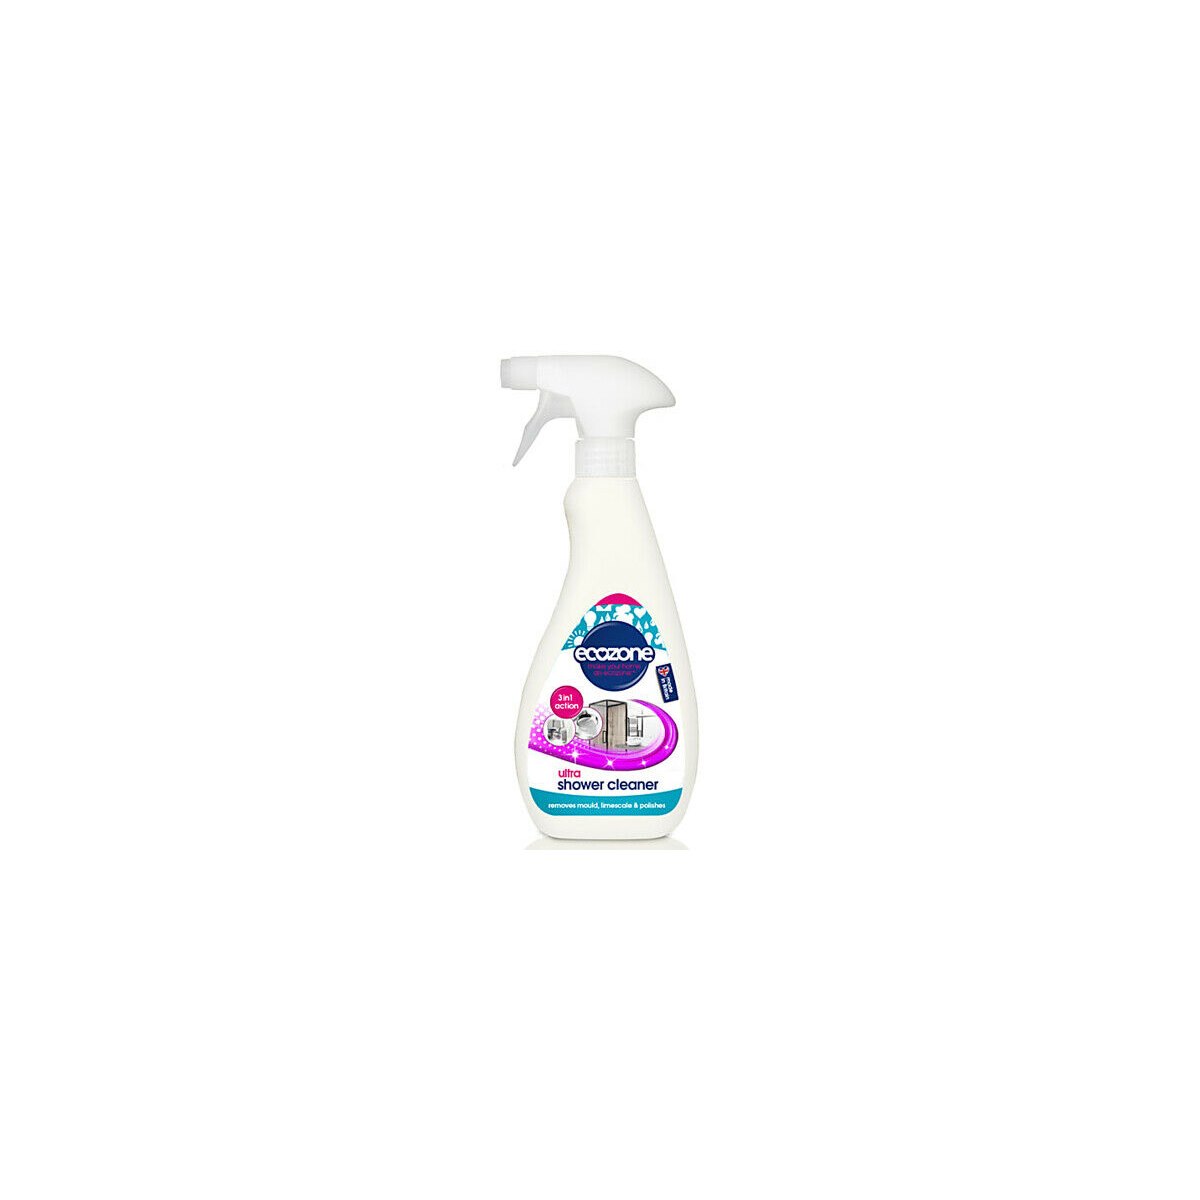 Ecozone 3 in 1 Action Ultra Shower Cleaner 500ml Removes Mould and Limescale